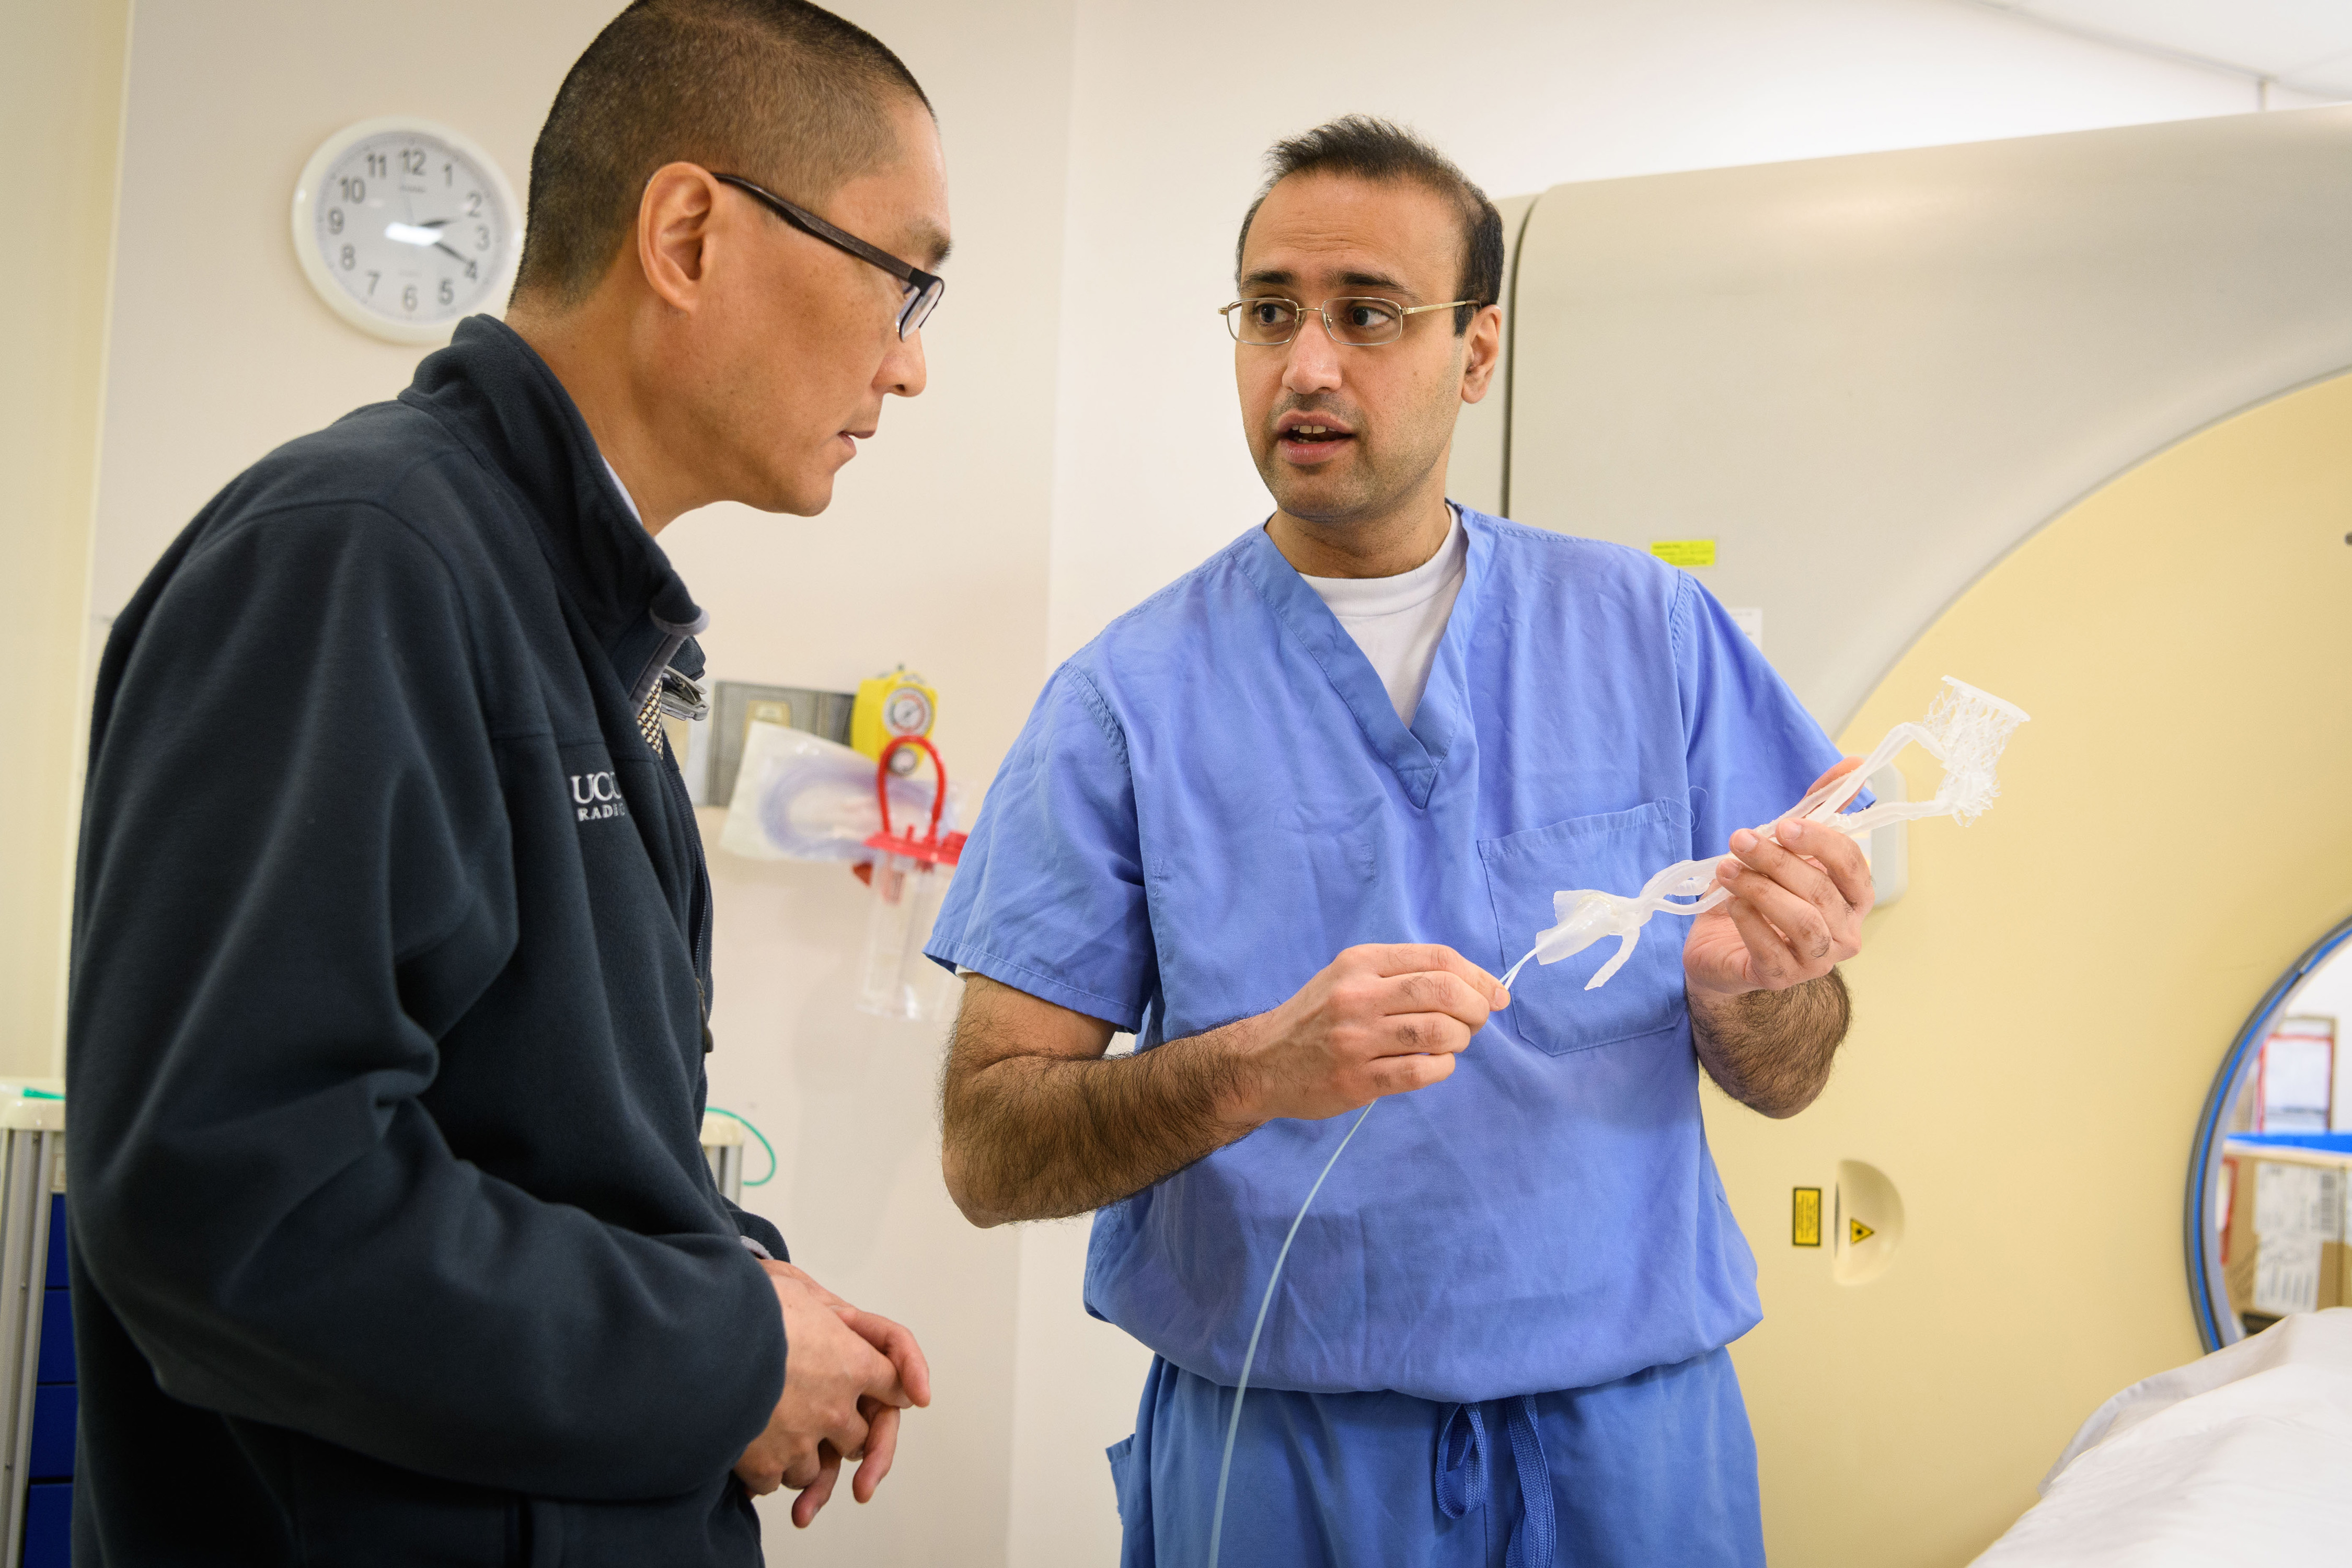 Dr. Charan K. Singh, right, holds a 3-D printed model of arteries and a catheter while speaking with Dr. Clifford Yang at UConn Health. (Peter Morenus/UConn Photo)